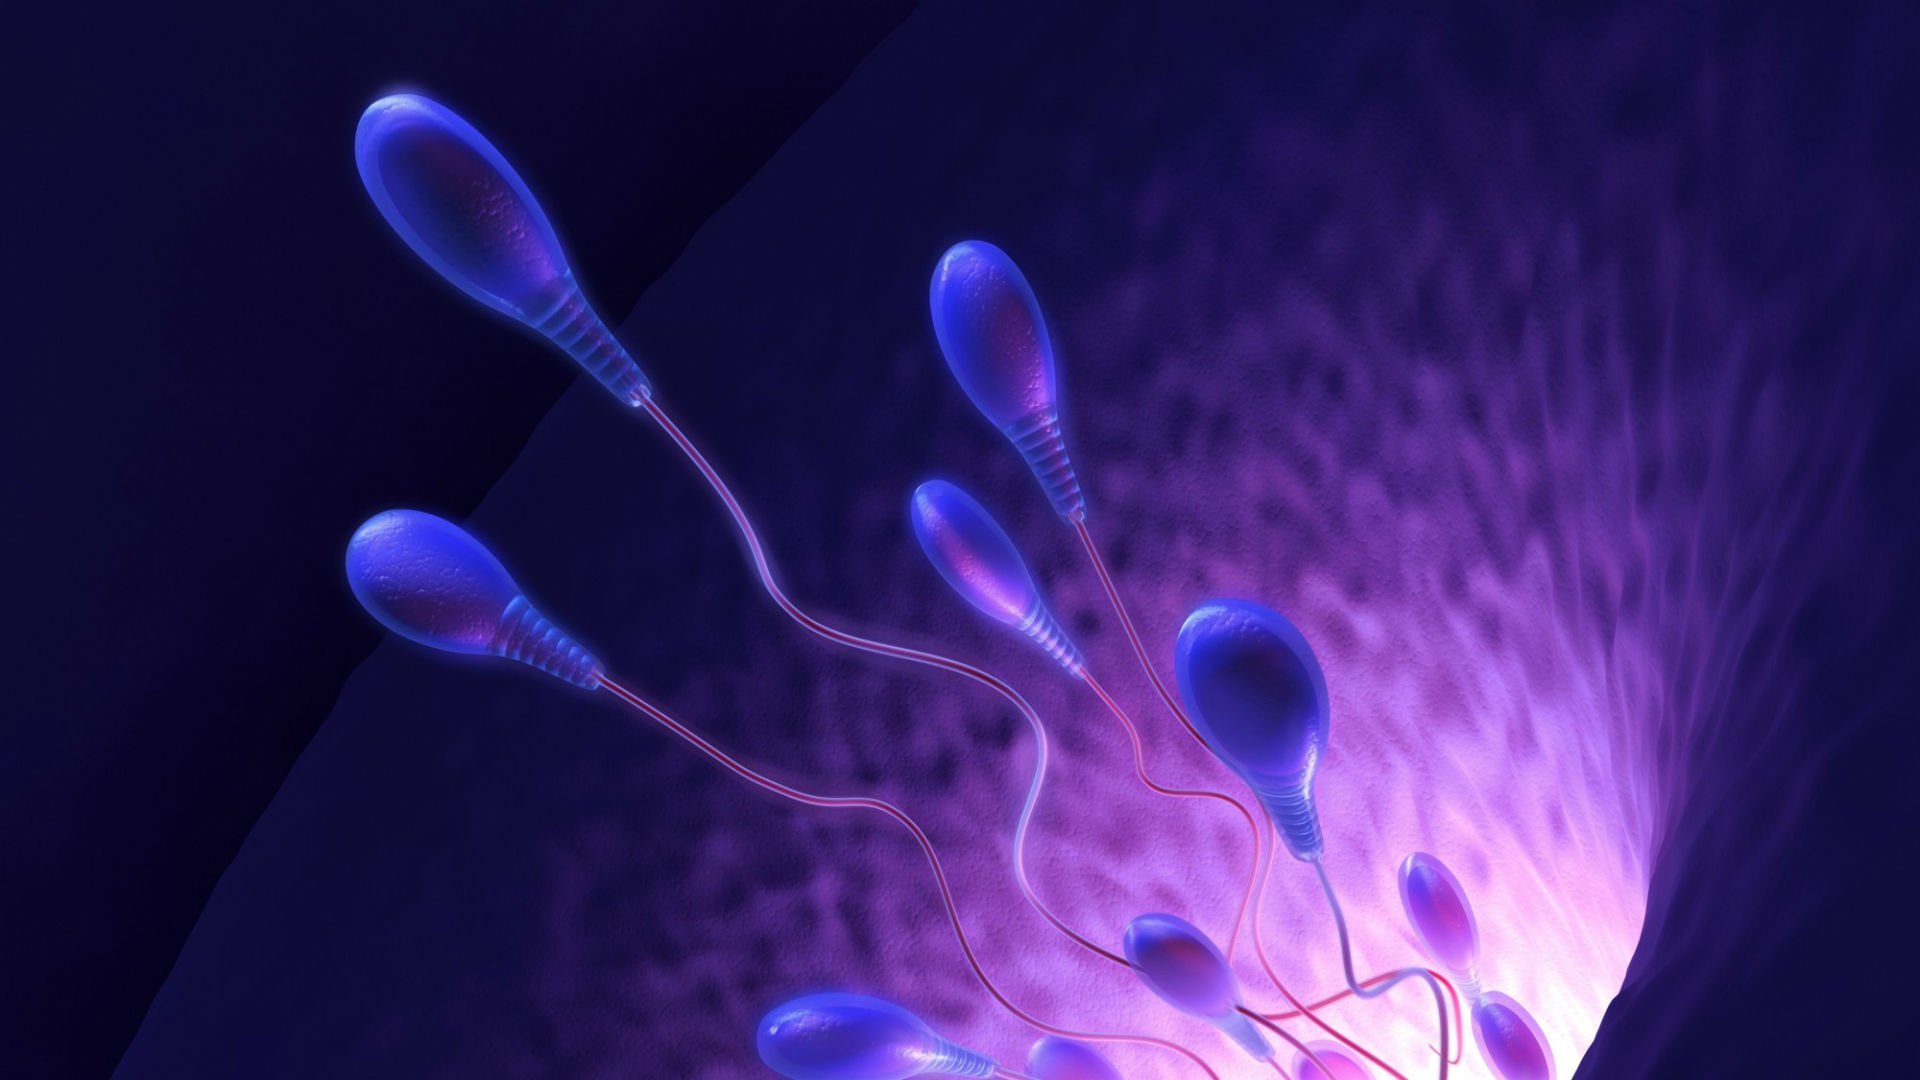 Free Download Sperm Abstraction Abstract Bokeh Life Sex Sexual Medical [1920x1080] For Your